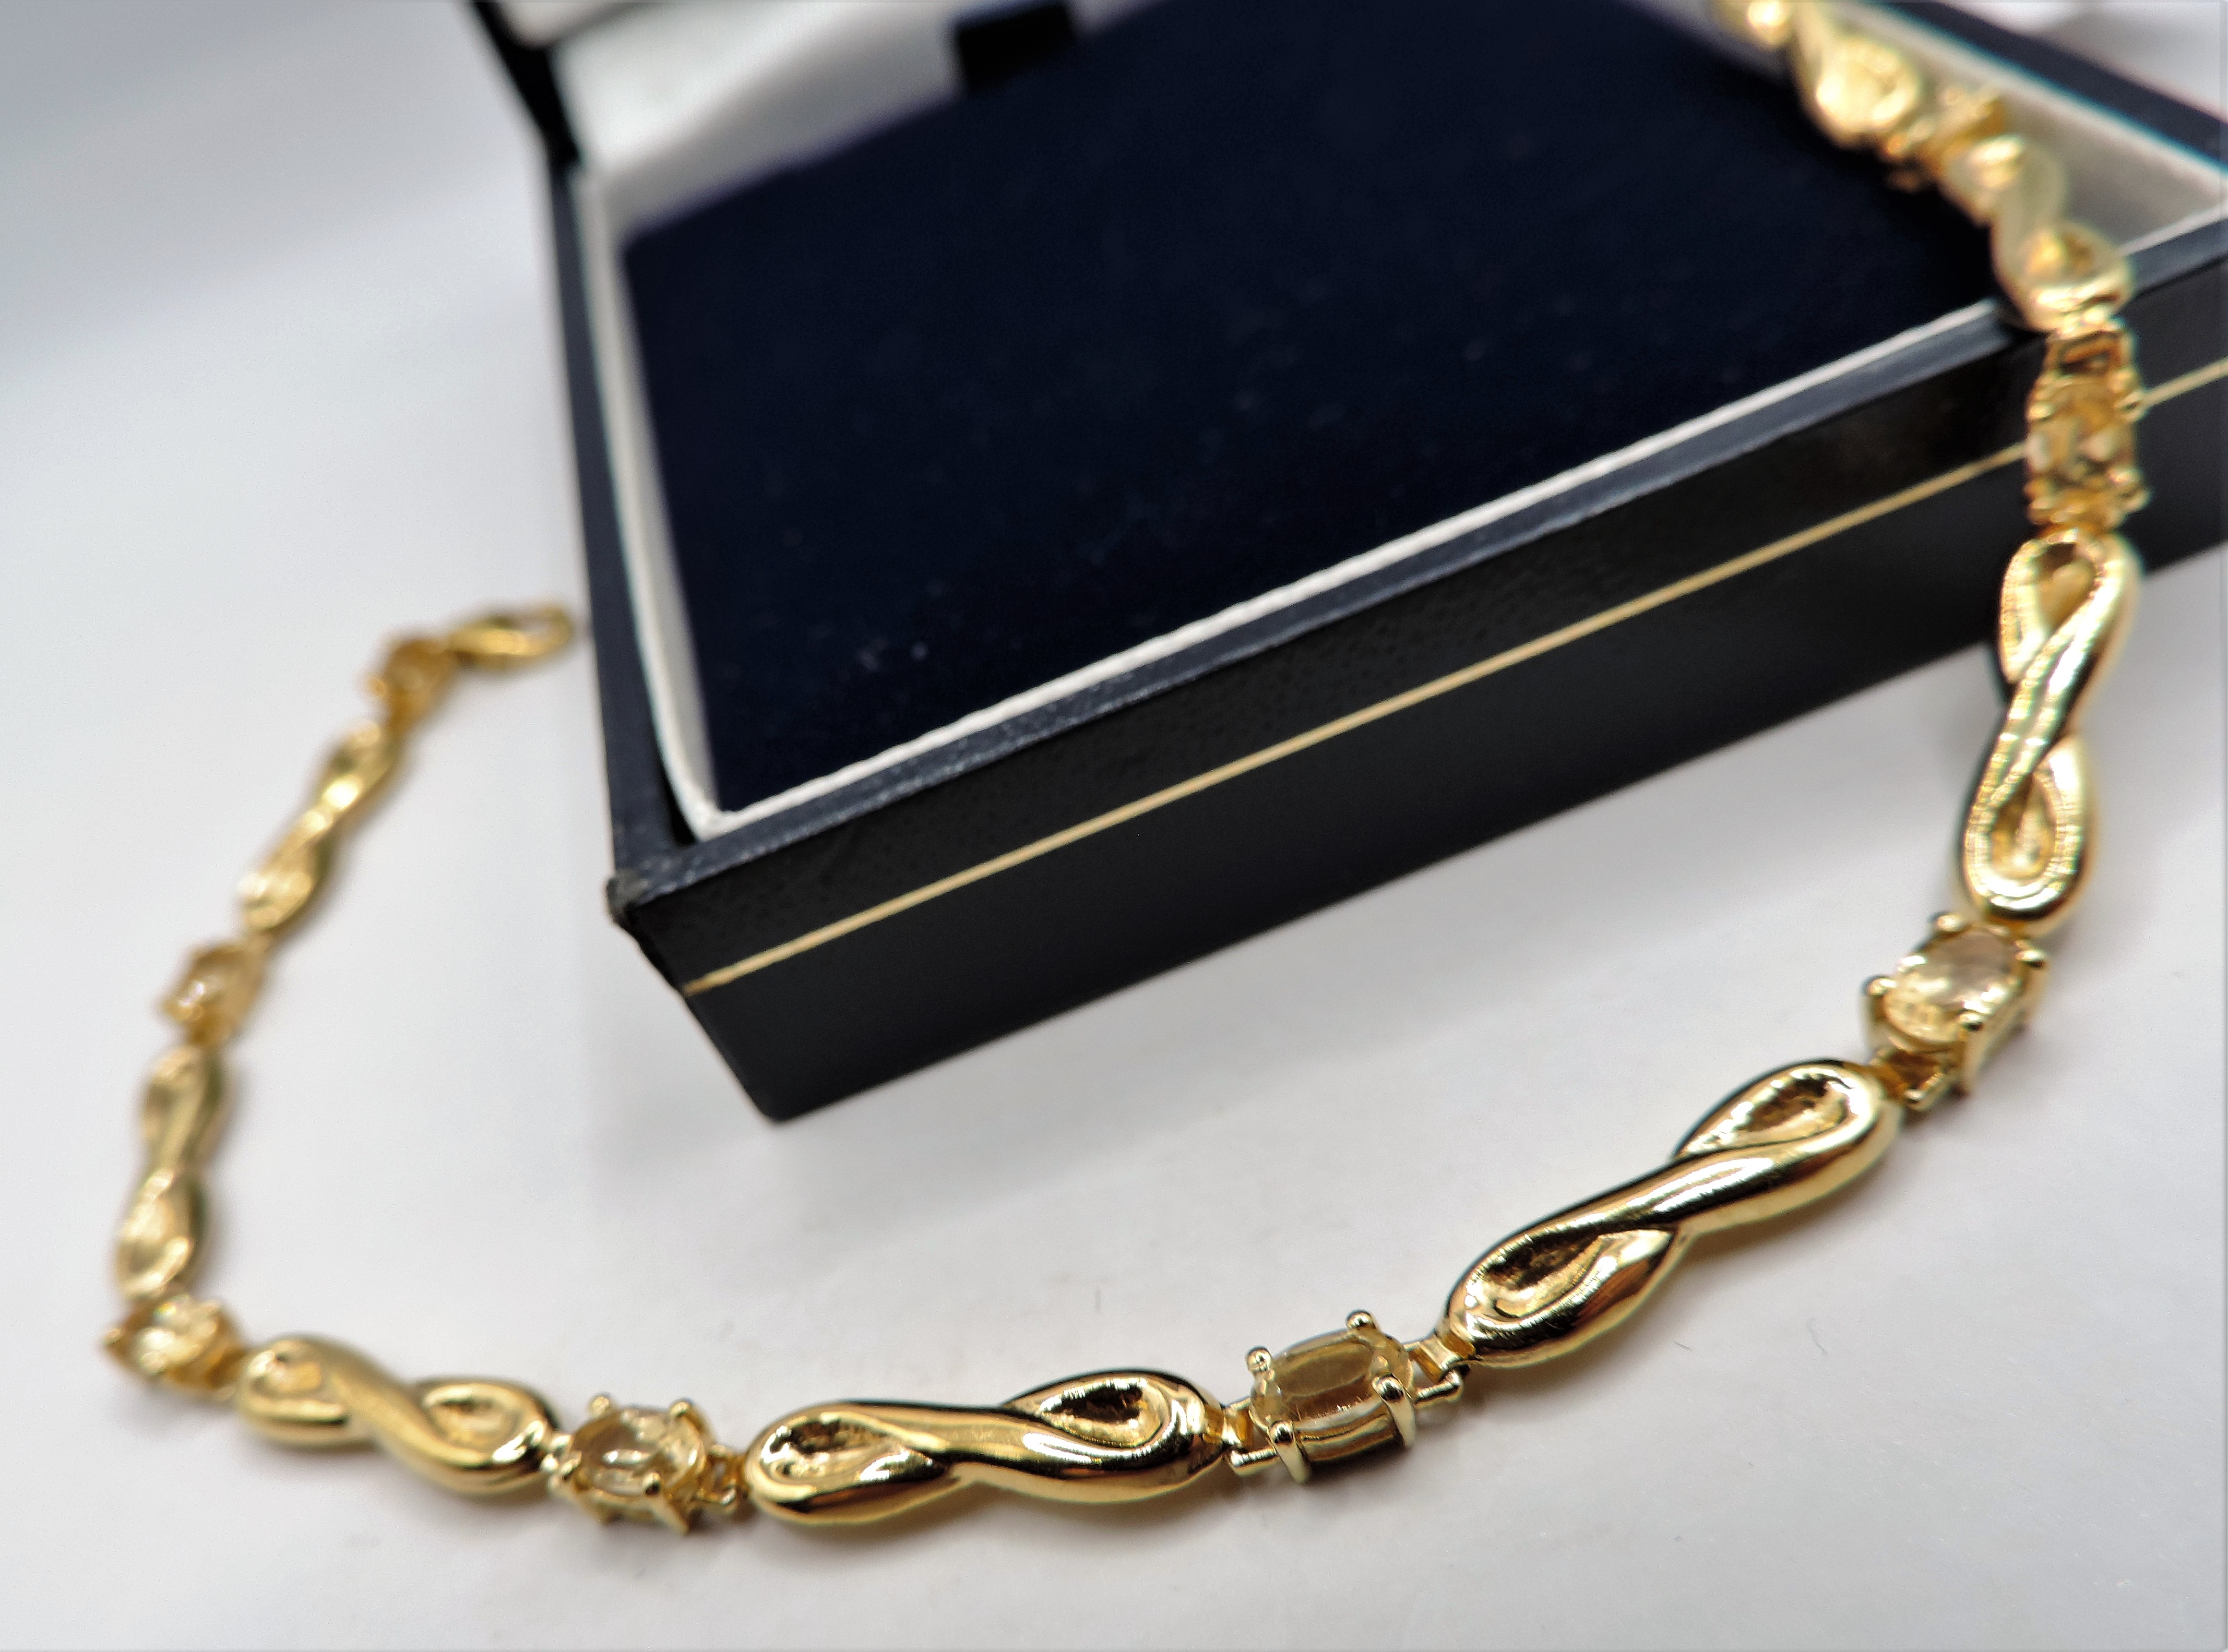 Gold on Sterling Silver Citrine Bracelet 'New' with Gift Box - Image 3 of 3